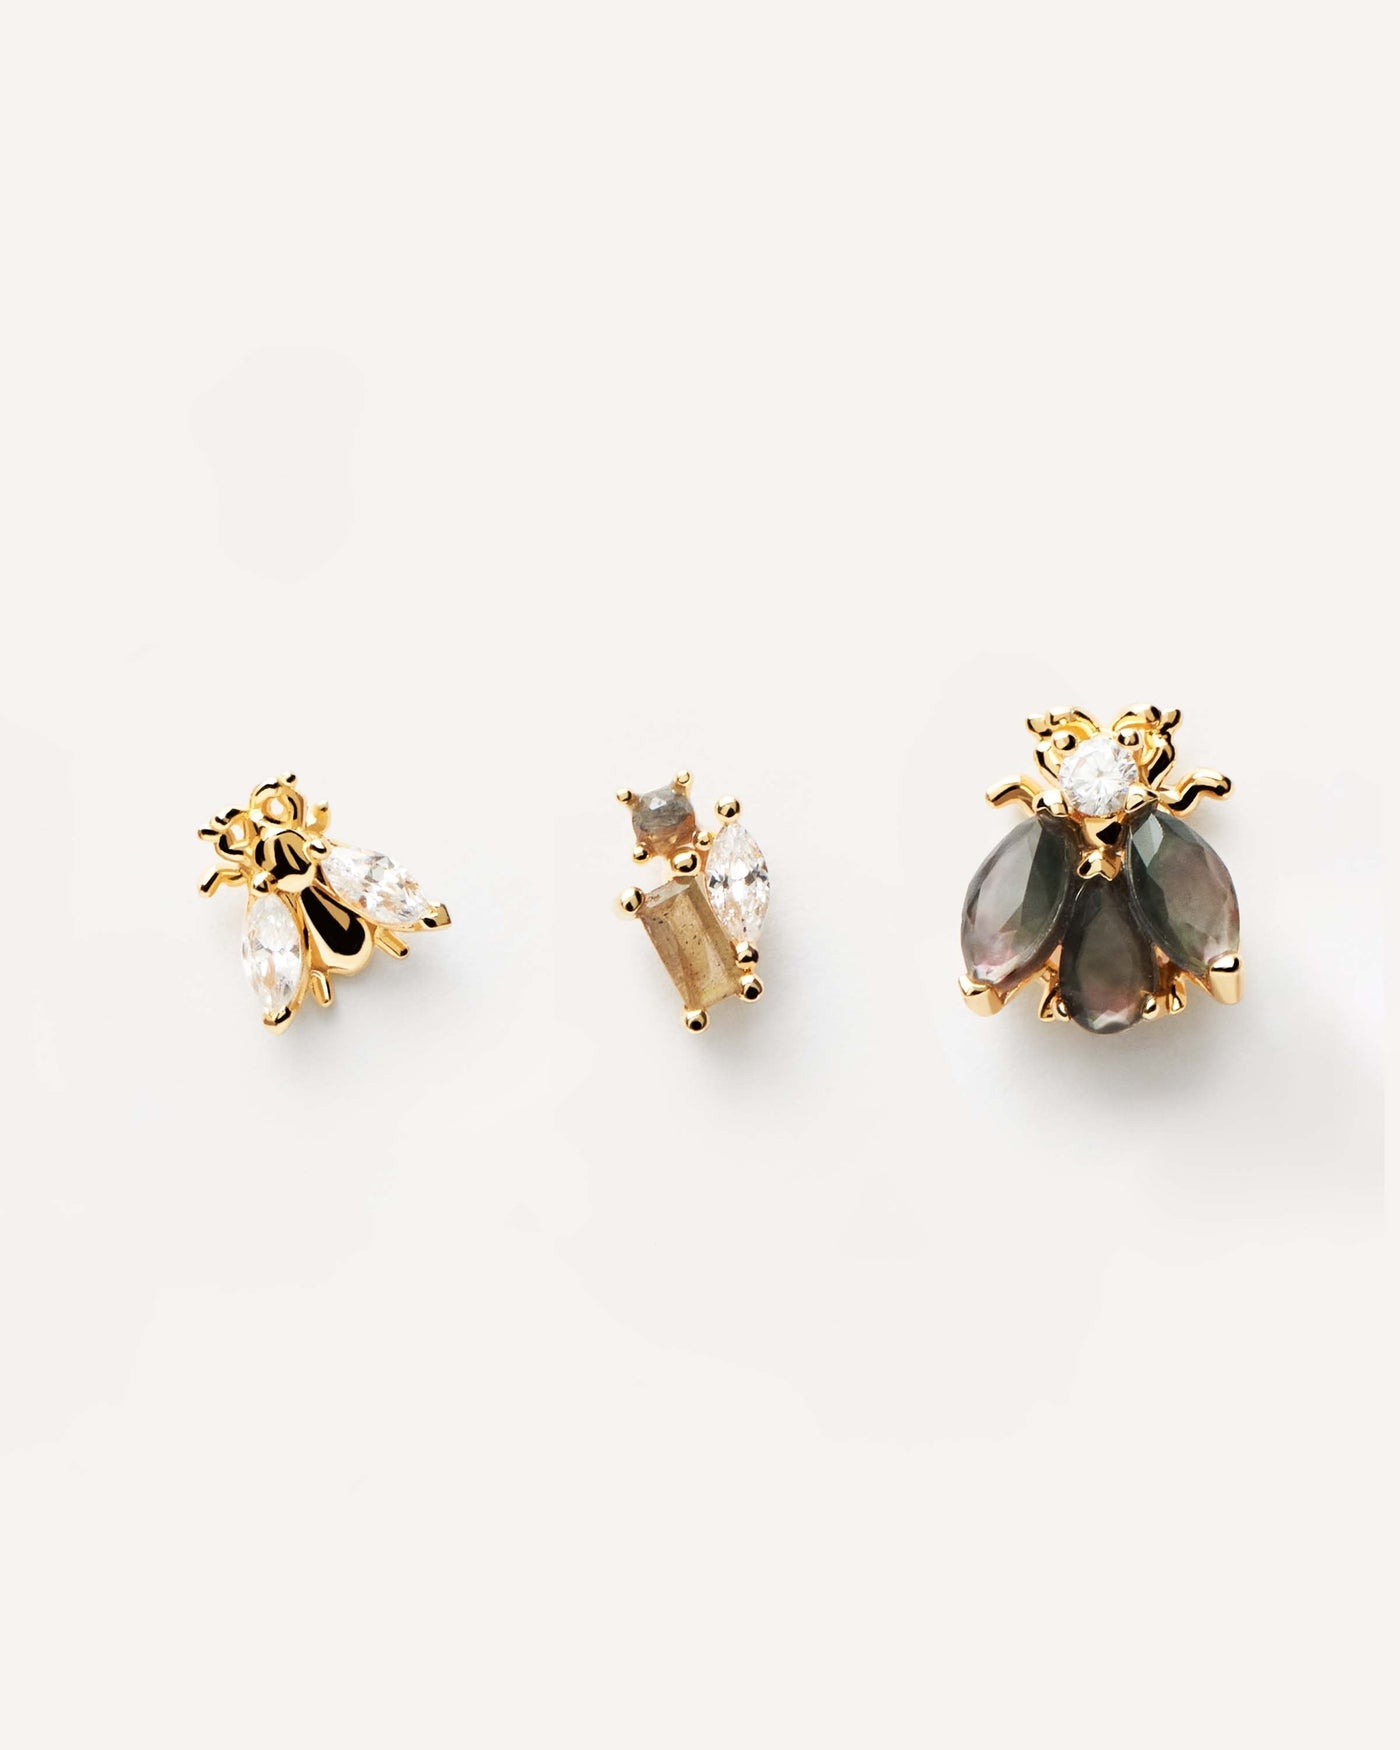 2022 Selection | La Bamba Gold Earrings Set. Get the latest arrival from PDPAOLA. Place your order safely and get this Best Seller. Free Shipping over 40€